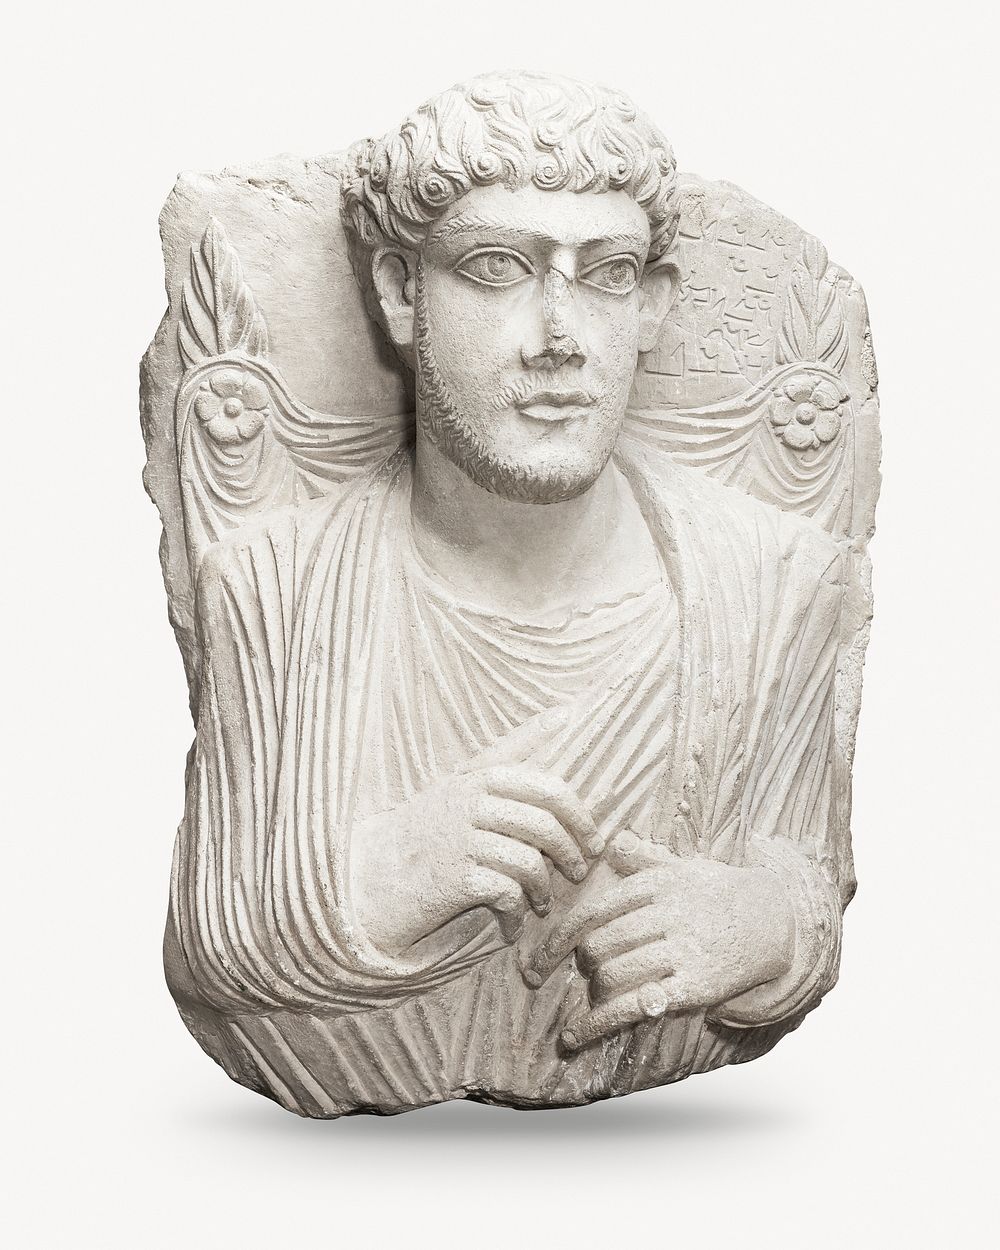 Funerary Relief, late 2nd century-first half of the 3rd century. Original from The Minneapolis Institute of Art. Digitally…